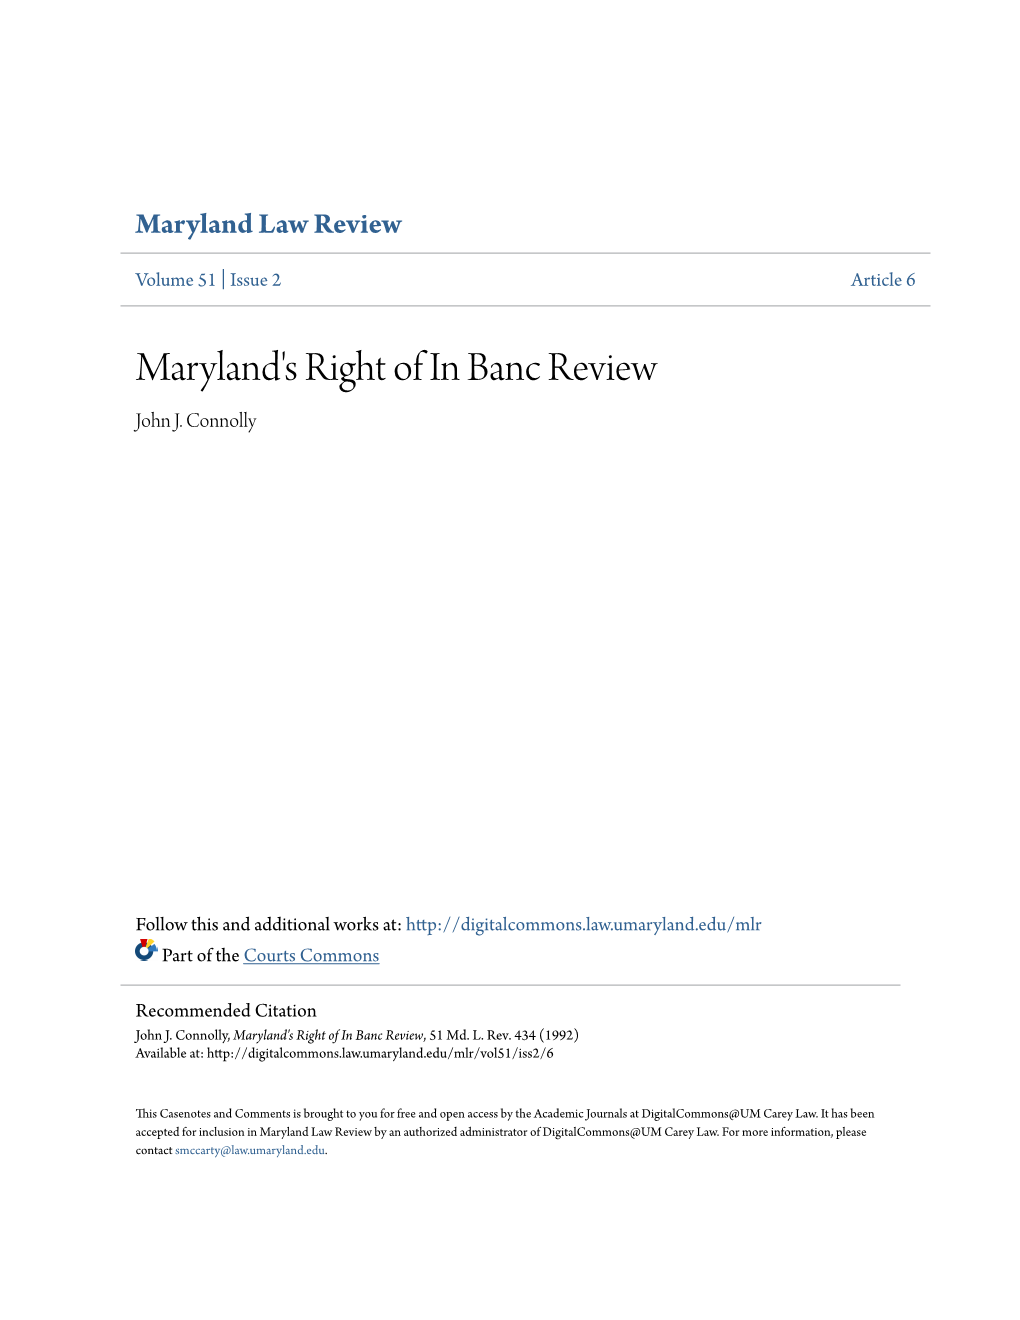 Maryland's Right of in Banc Review John J